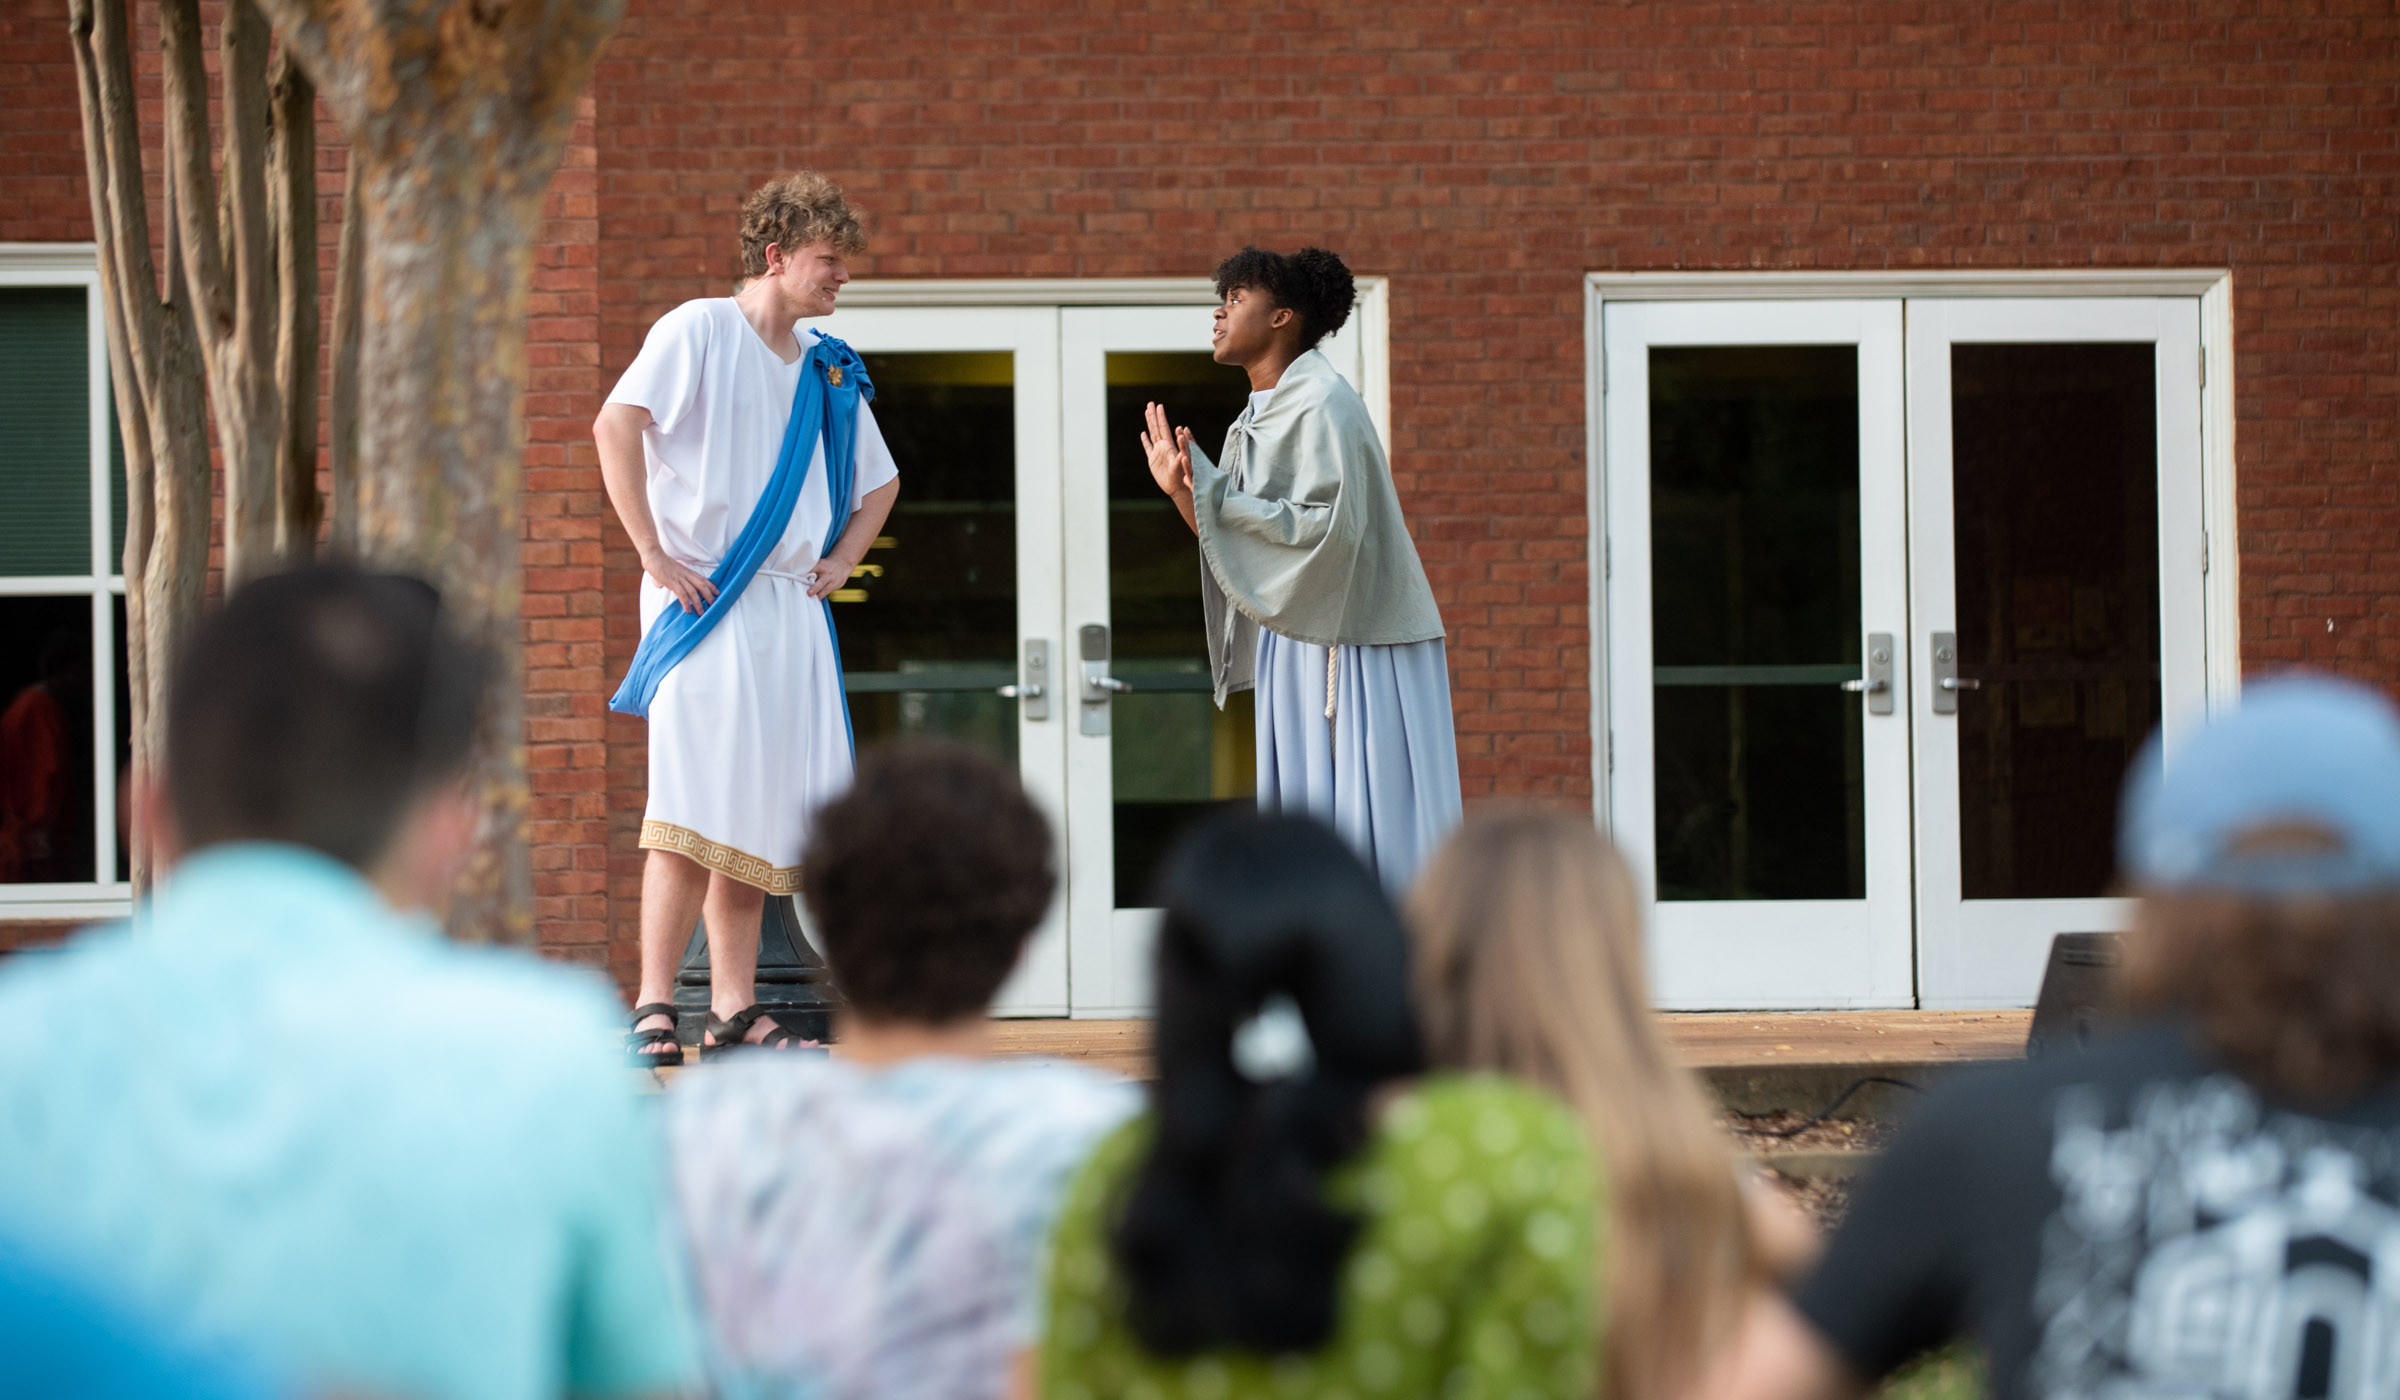 Two student actors in togas peform outside Griffis Hall doors, with the backs of audience members in the foreground.